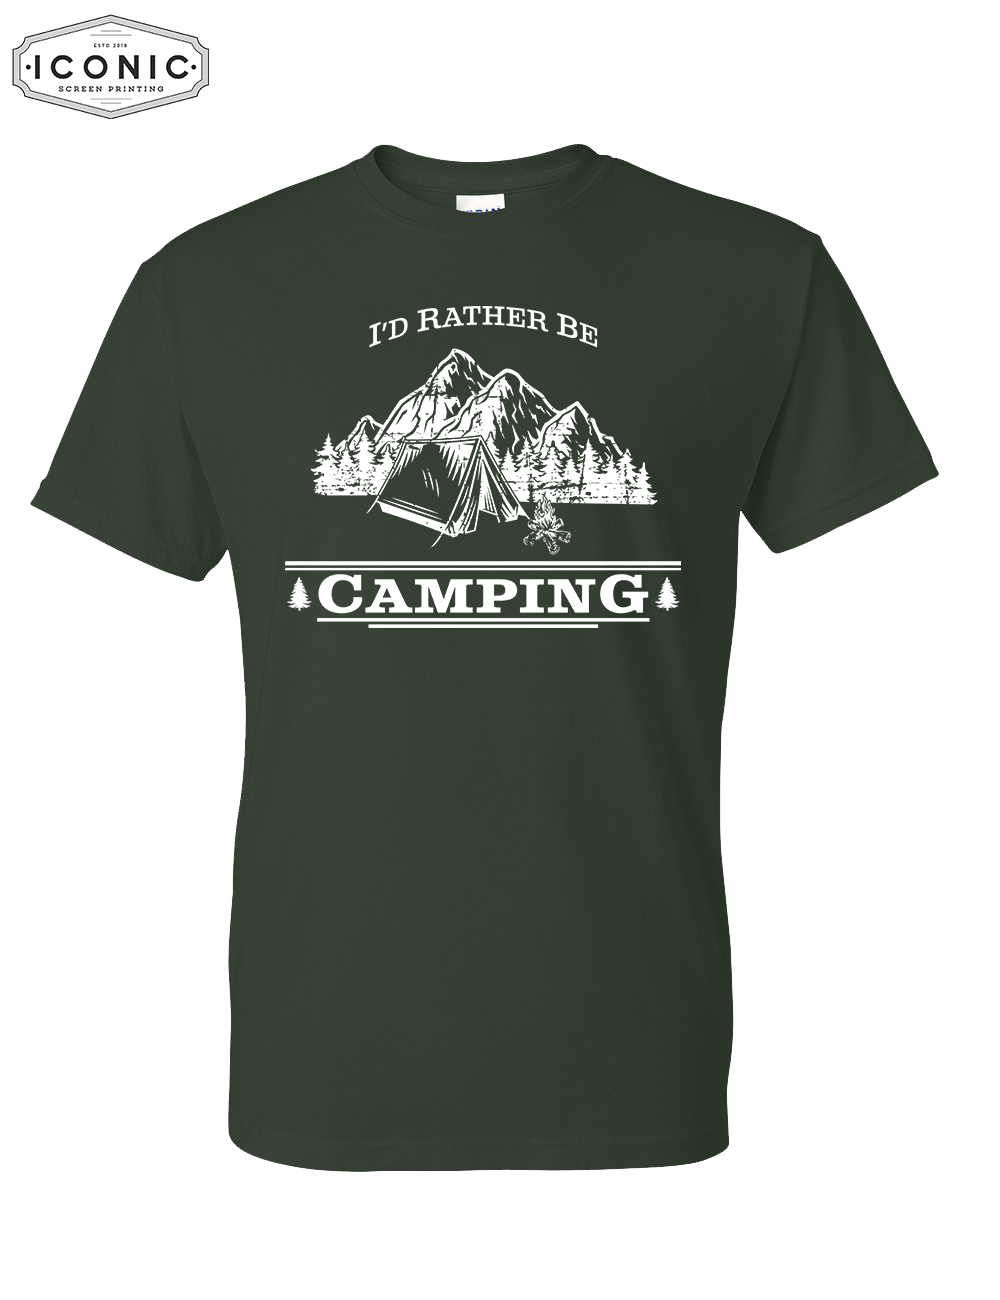 I'd Rather Be Camping - DryBlend T-shirt